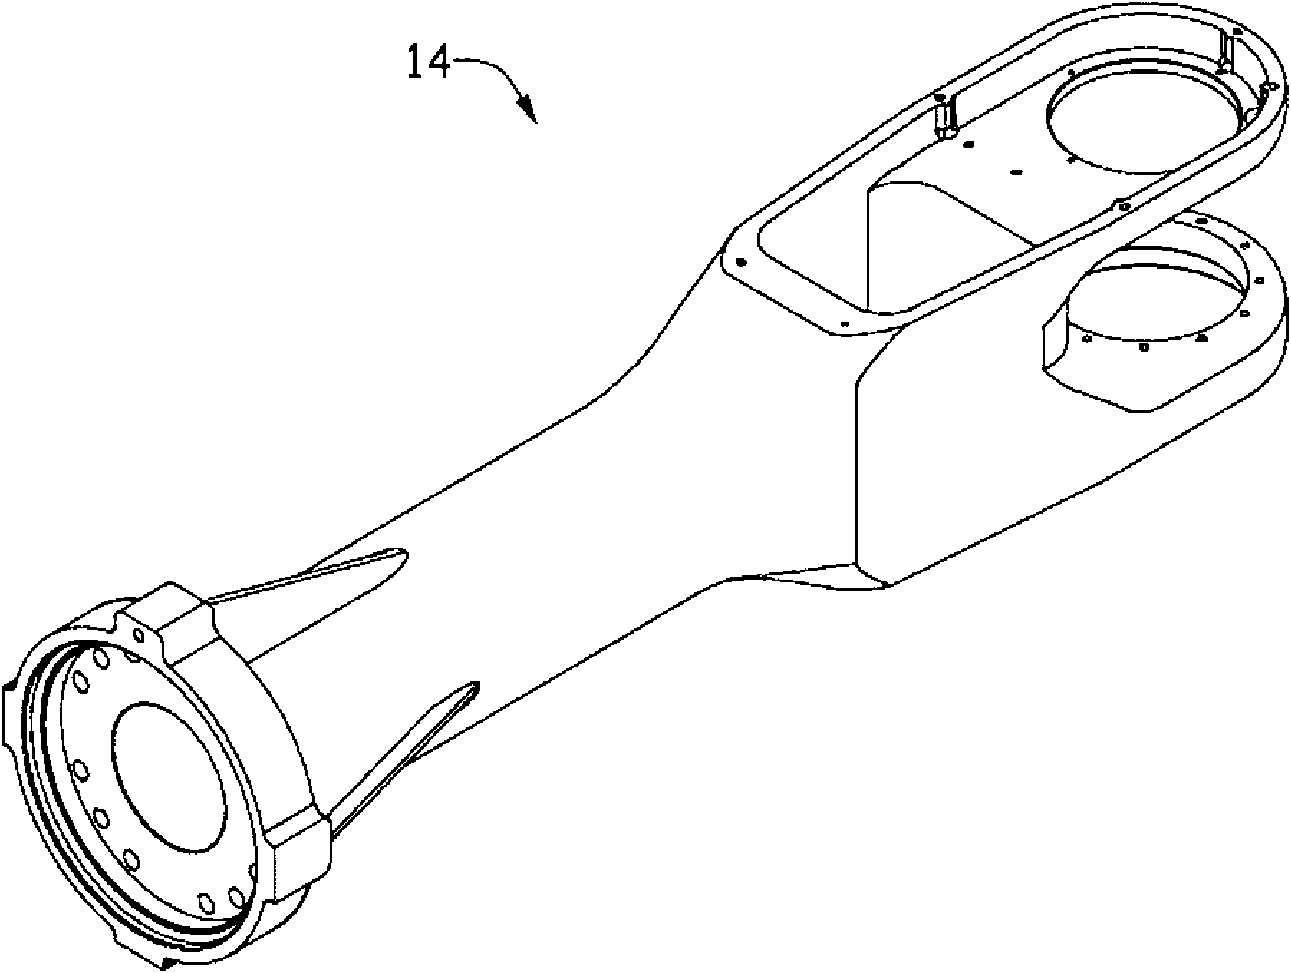 Robot arm component, manufacturing method thereof and robot with arm component